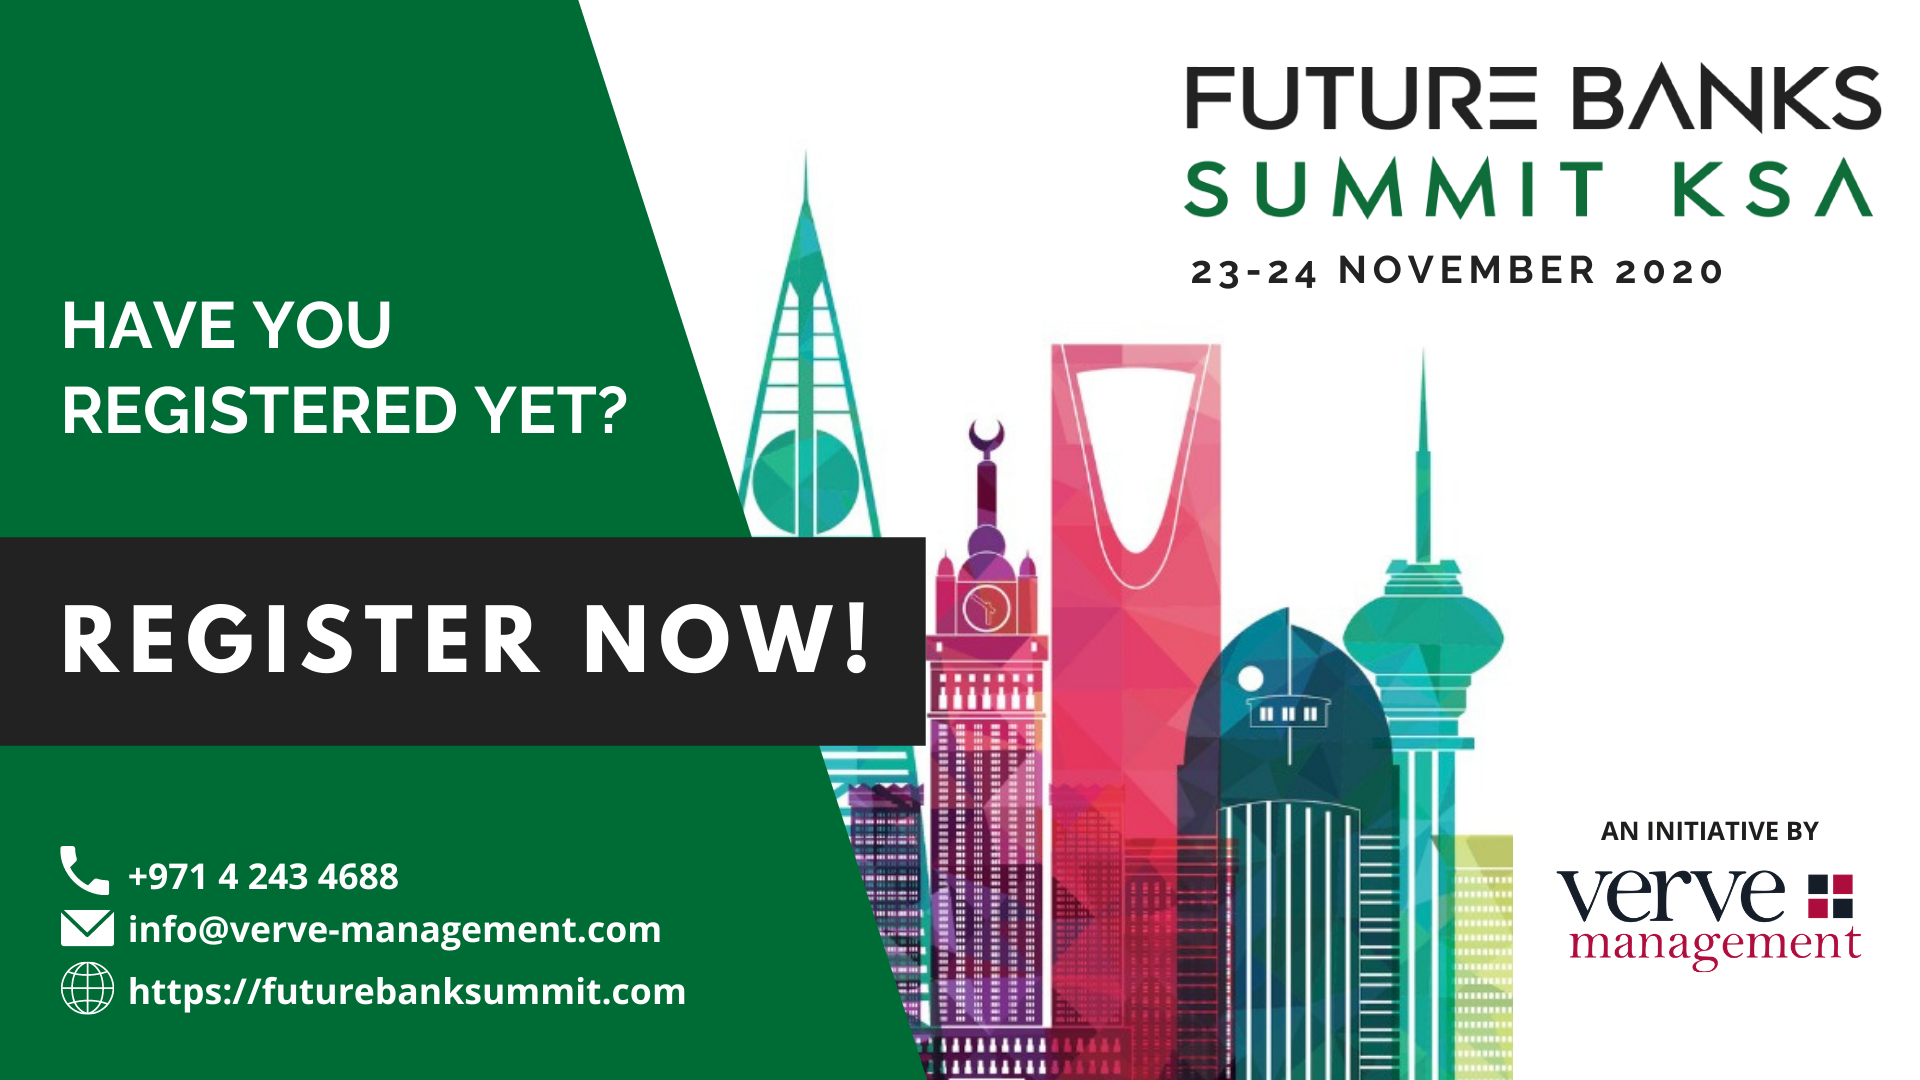 Last Chance to Register for Future Bank Summit KSA!